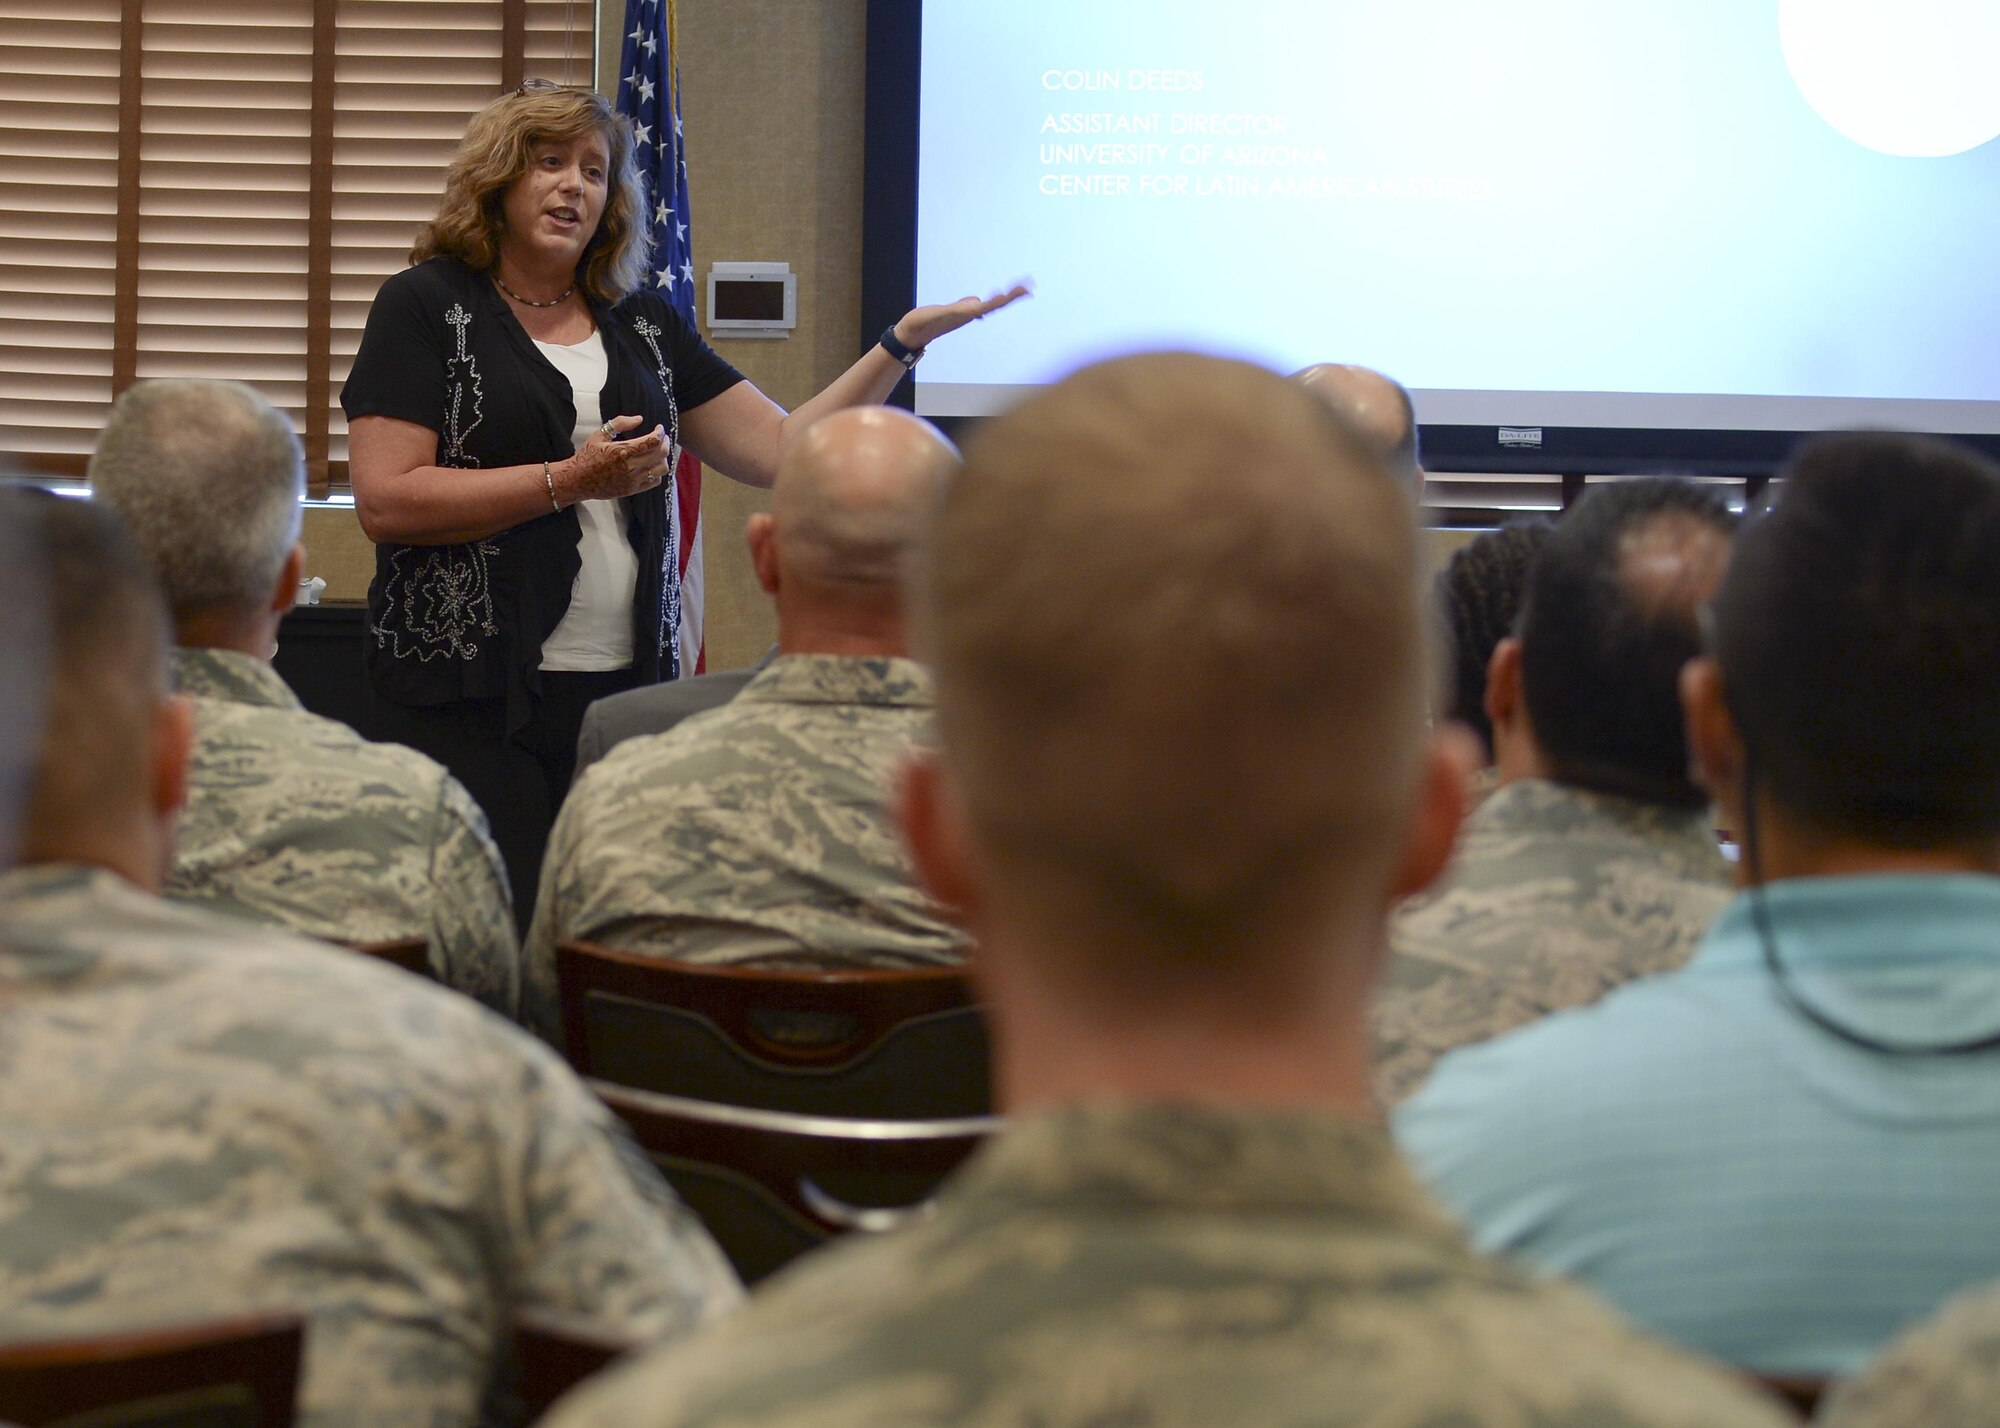 Dr. Melondy Buckner, University of Arizona South interim dean, speaks during a speaker series event at Davis-Monthan Air Force Base, Ariz., June 19, 2017, for the 12th Air Force (Air Forces Southern) Academic Outreach Program with the University of Arizona. The intent of the speaker series is to facilitate the exchange ideas between government and academic institutions while fostering collaborative discussions about global issues.  This 12th Air Force (Air Forces Southern) Academic Outreach Program is modeled after U.S Southern Command’s partnership with Florida International University. (U.S. Air Force photo by Staff Sgt. Angela Ruiz) 